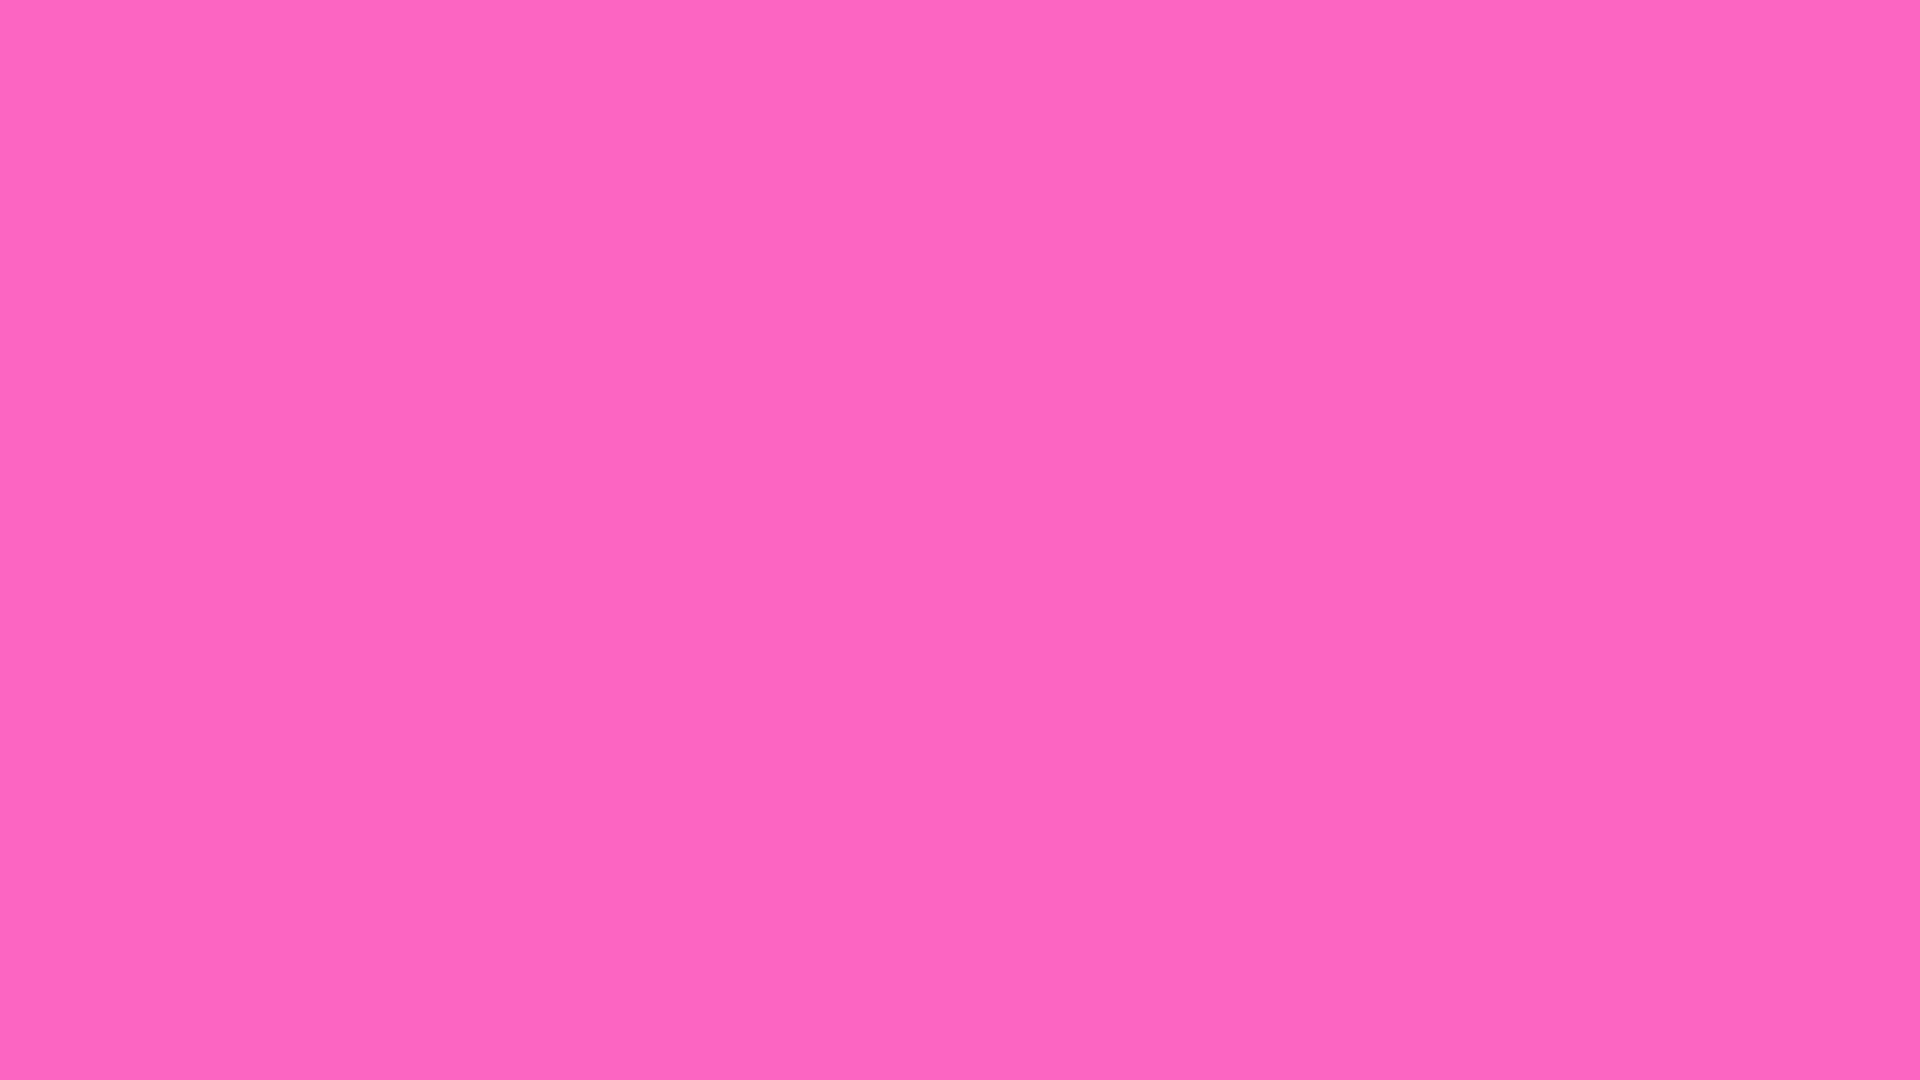 Soft Solid Pink Background